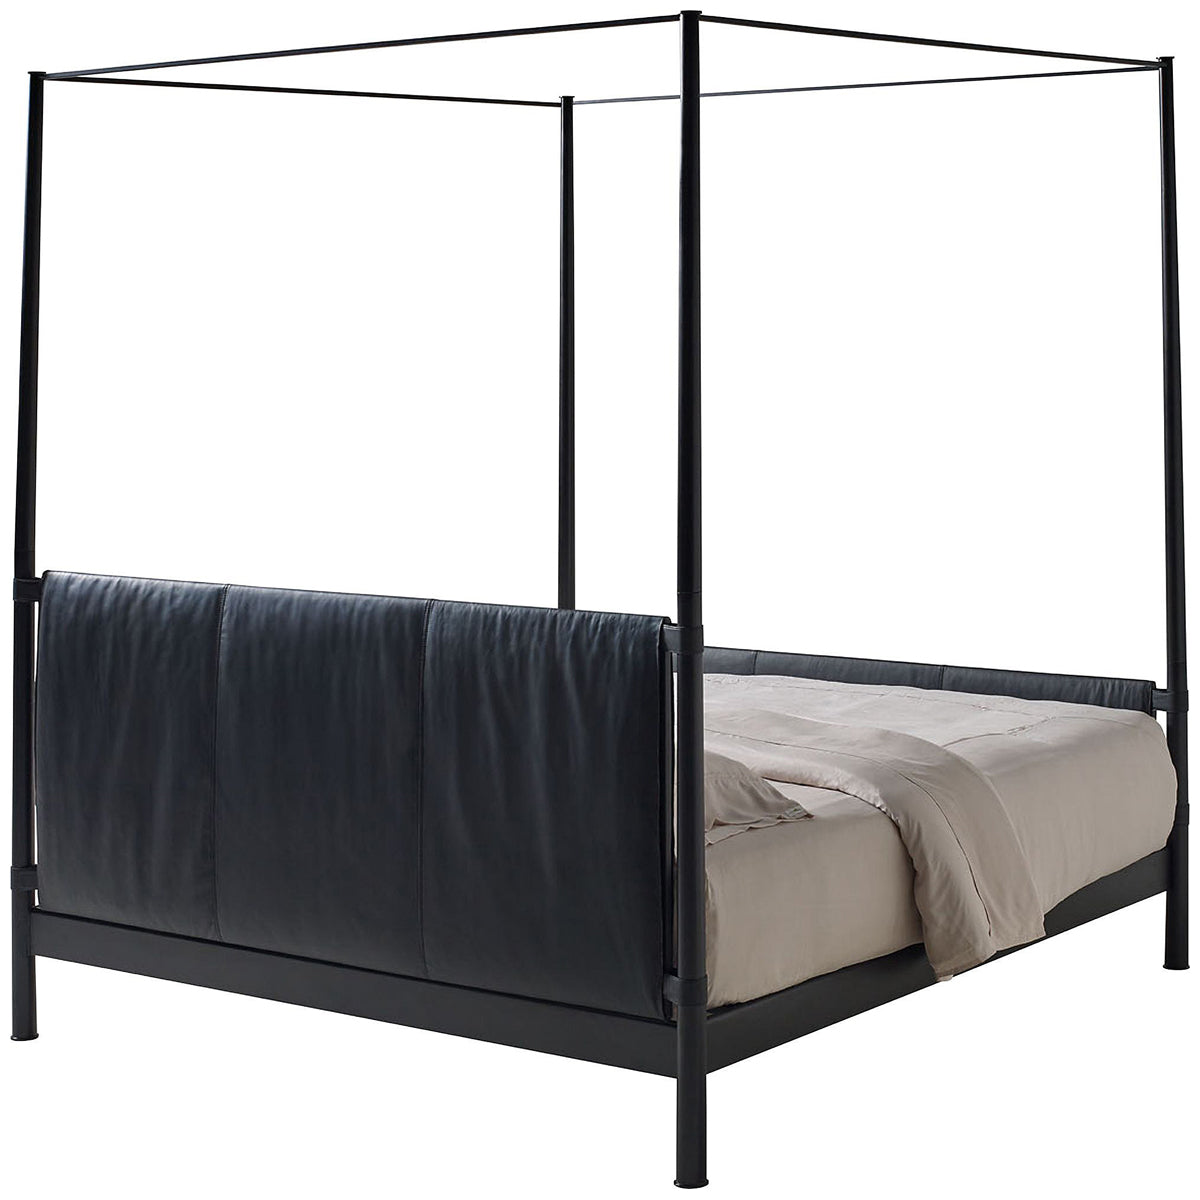 Baker Furniture Caged Bed with Post and Canopy MR7021